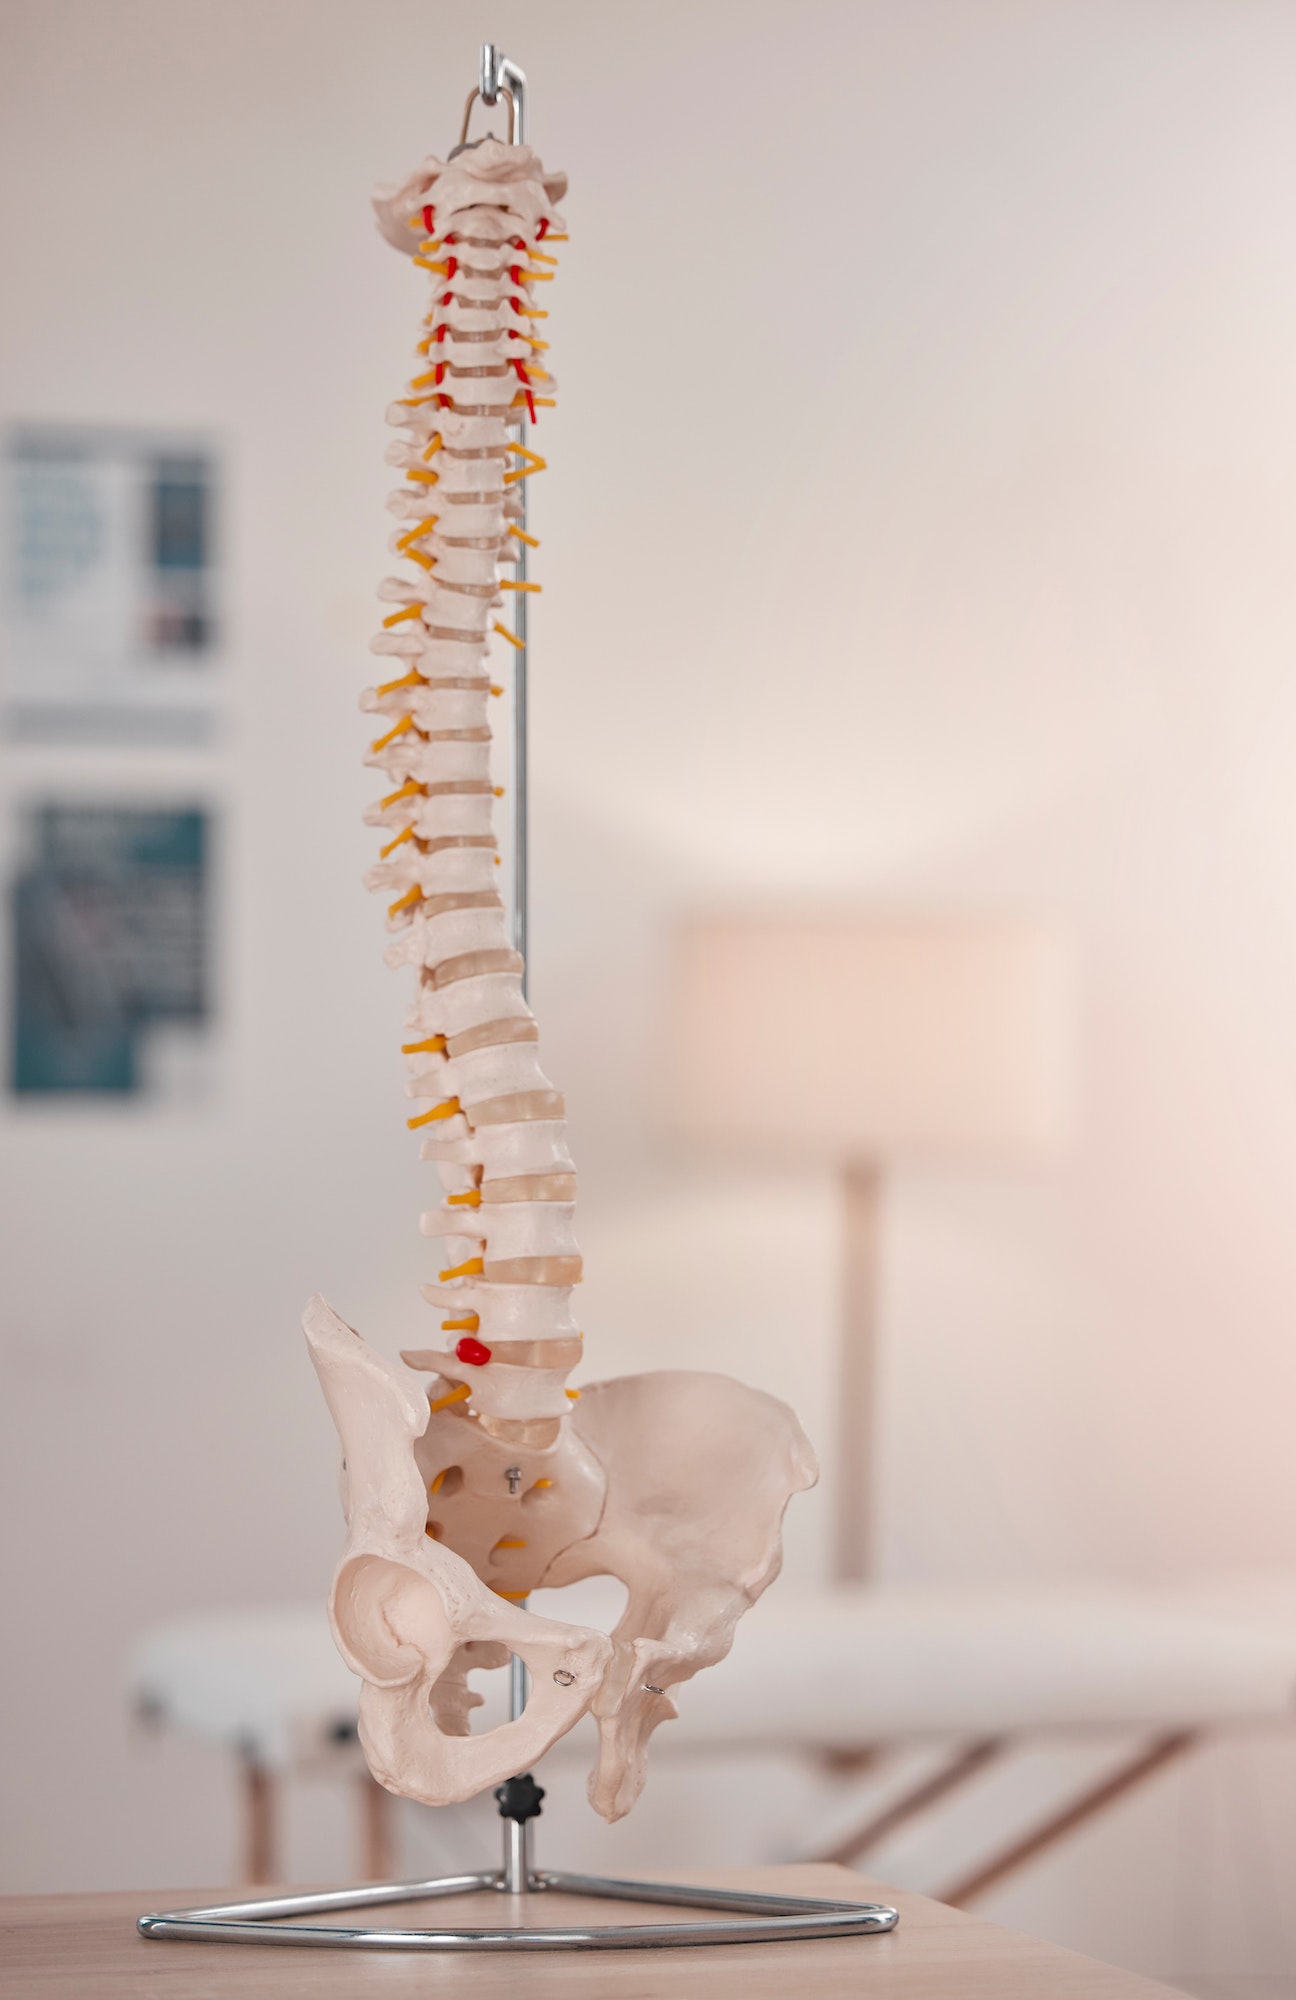 Spine model, bone and chiropractic office on table, desk or display for learning, education or advi